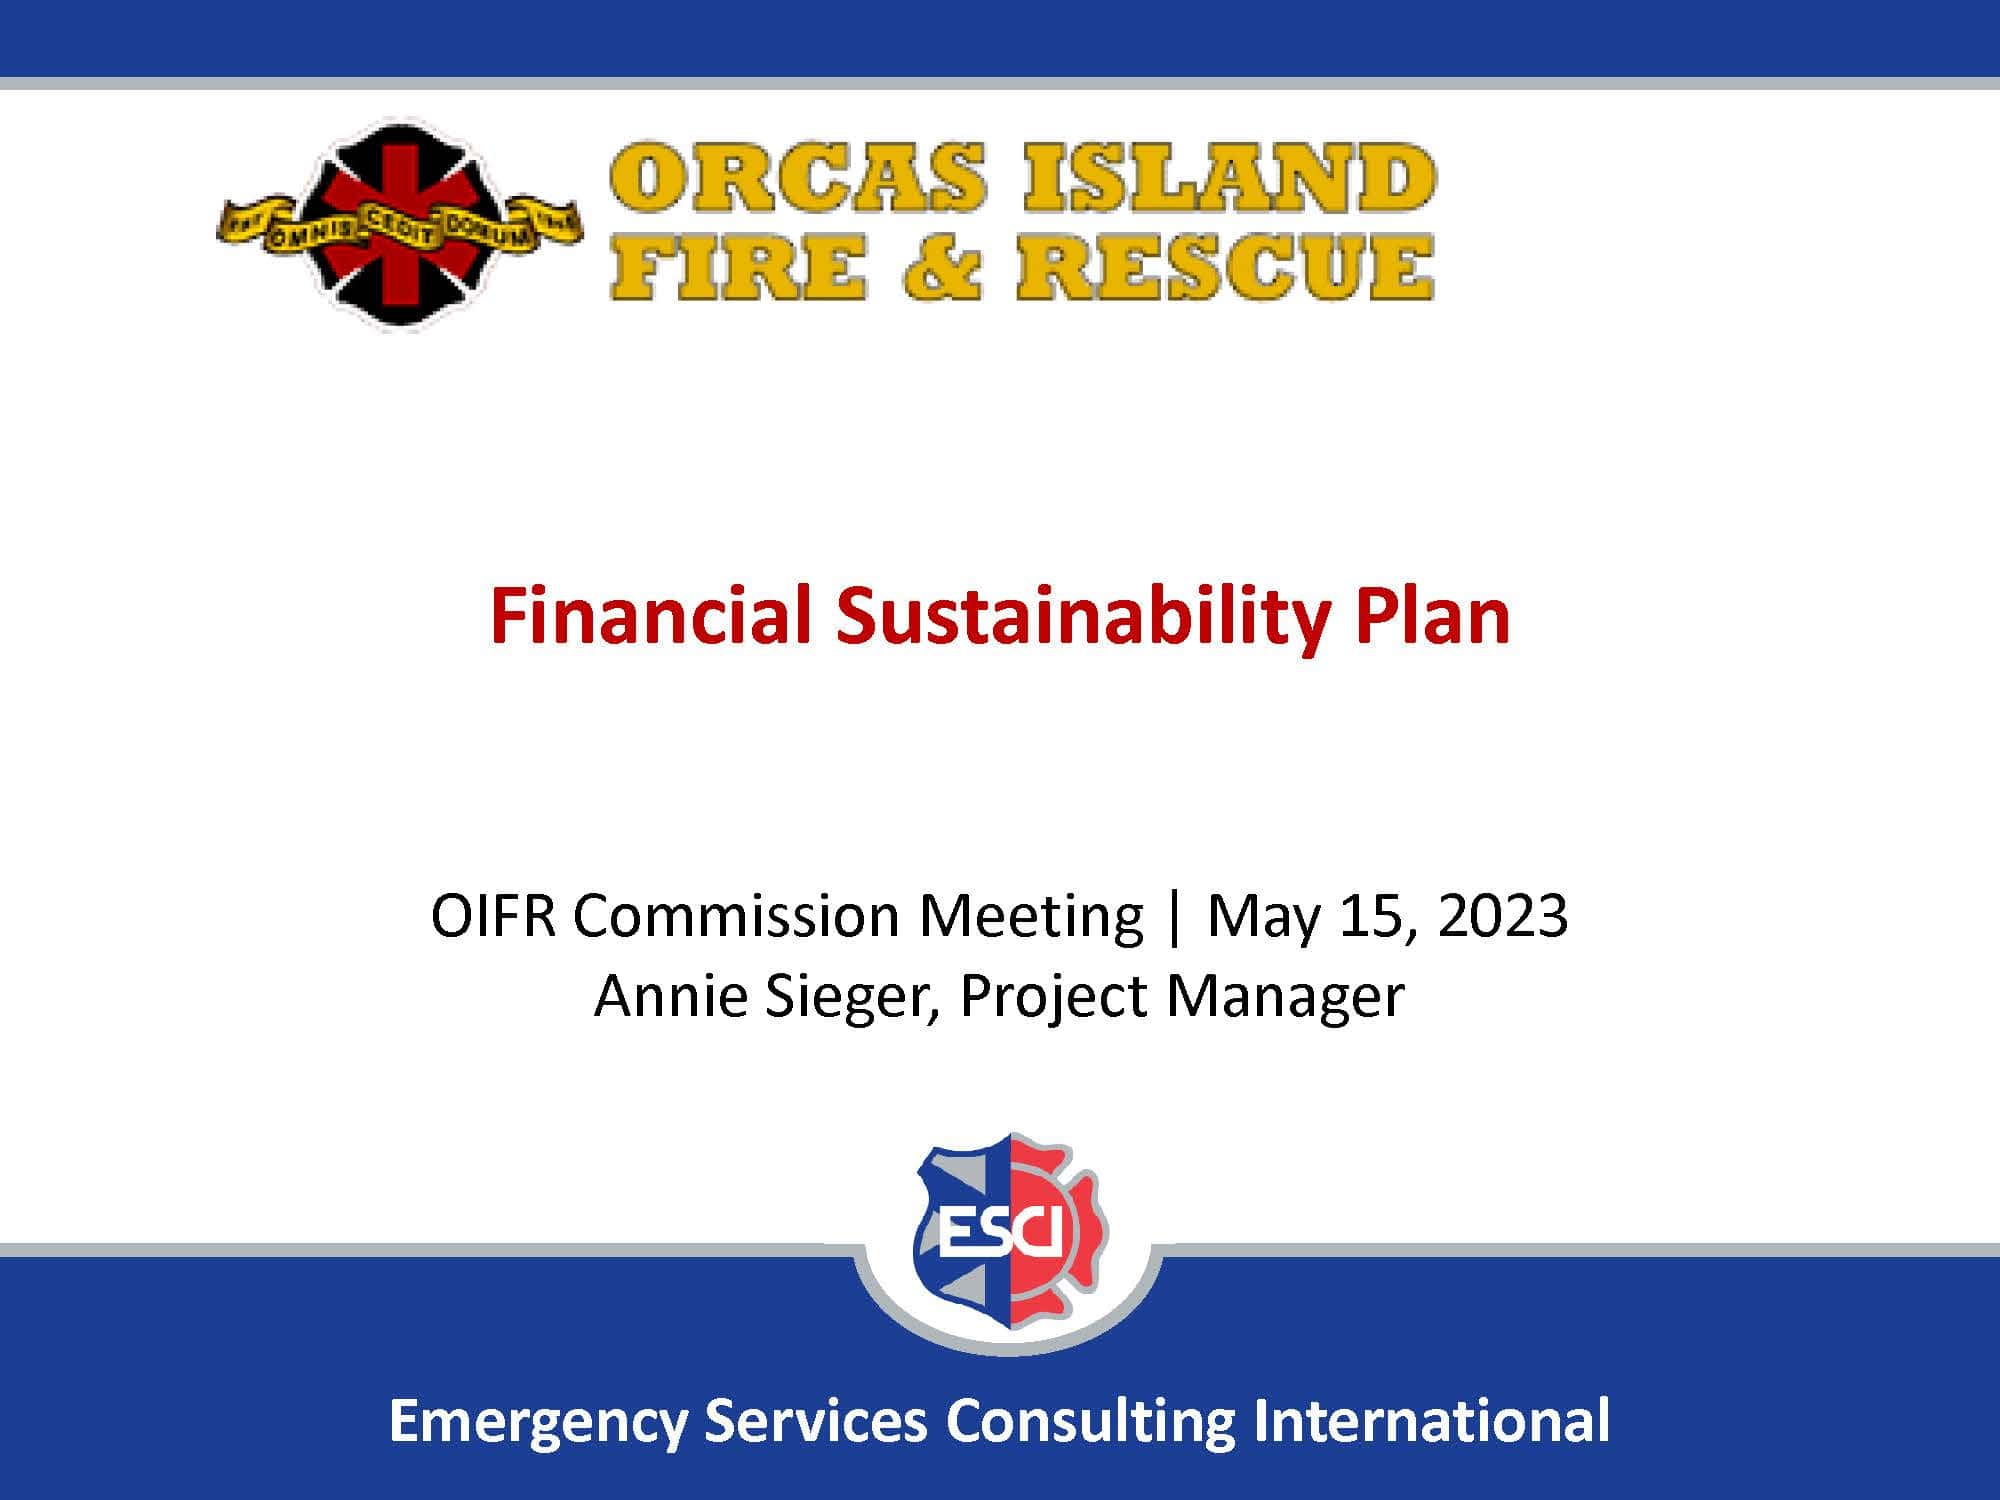 OIFR Financial Sustainabilty Plan_Full Results 2023_0515 (1)_Page_01